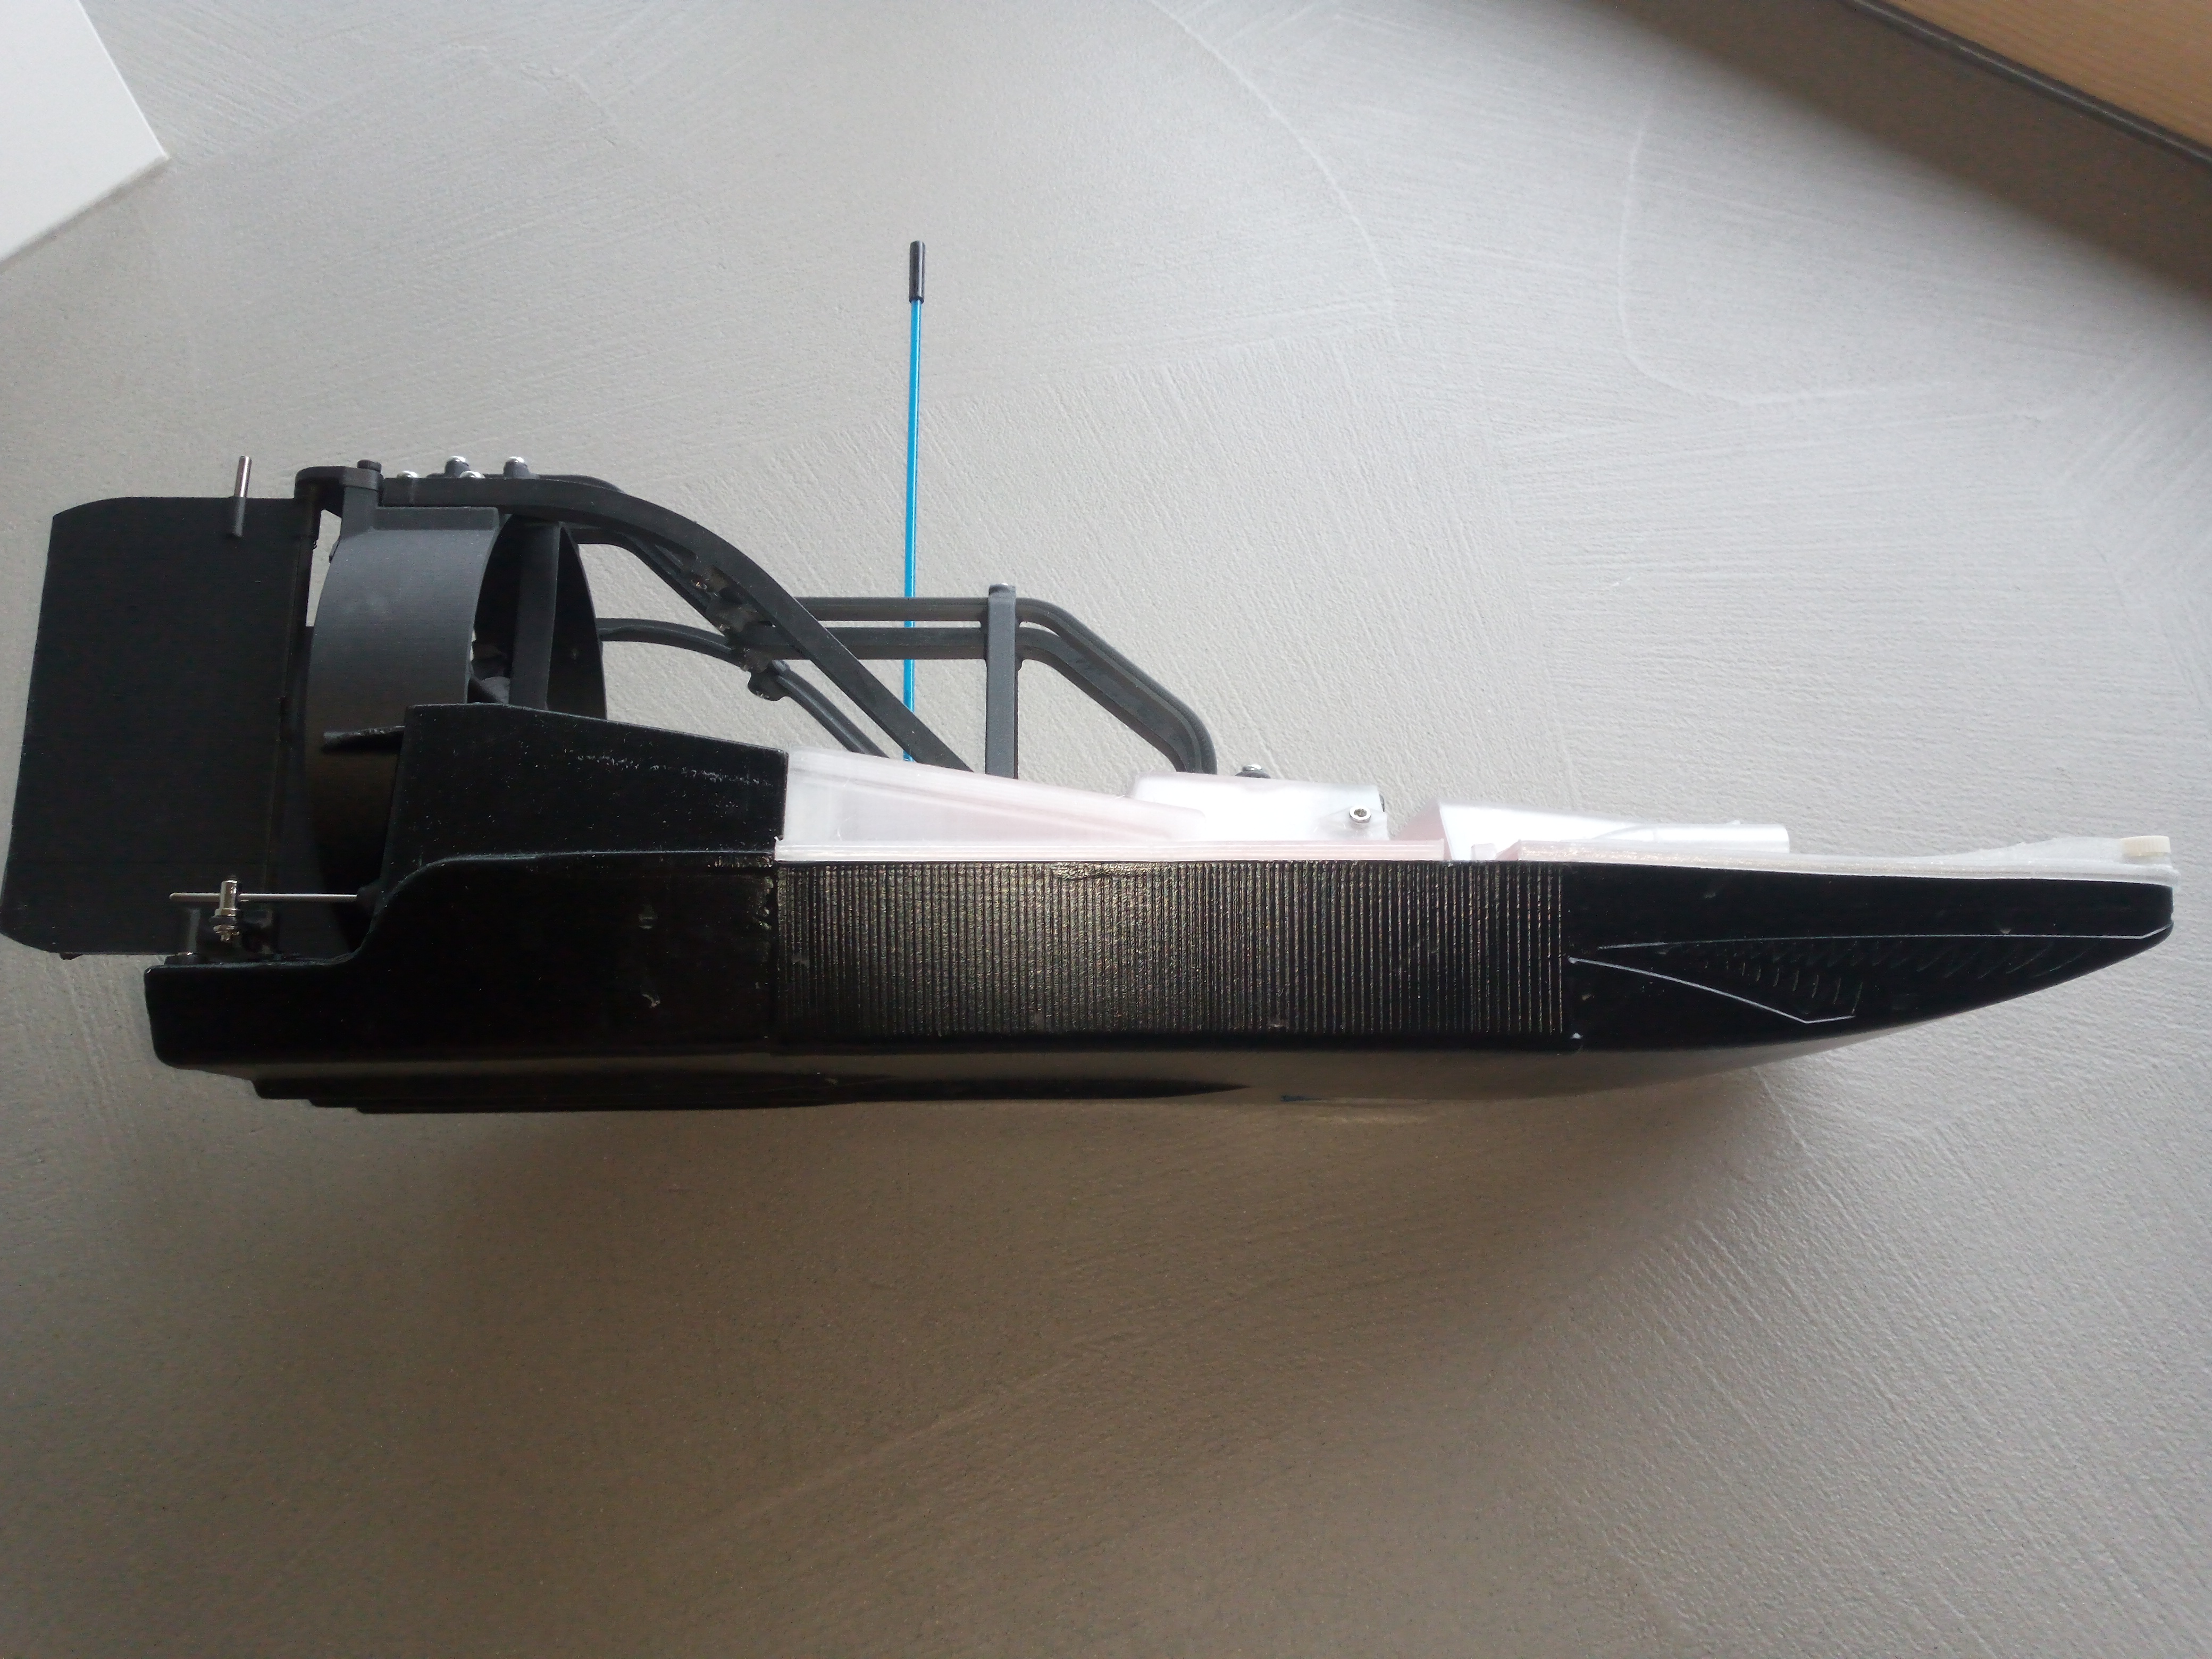 Full functional RC Boat made of Traxxas Blast elements